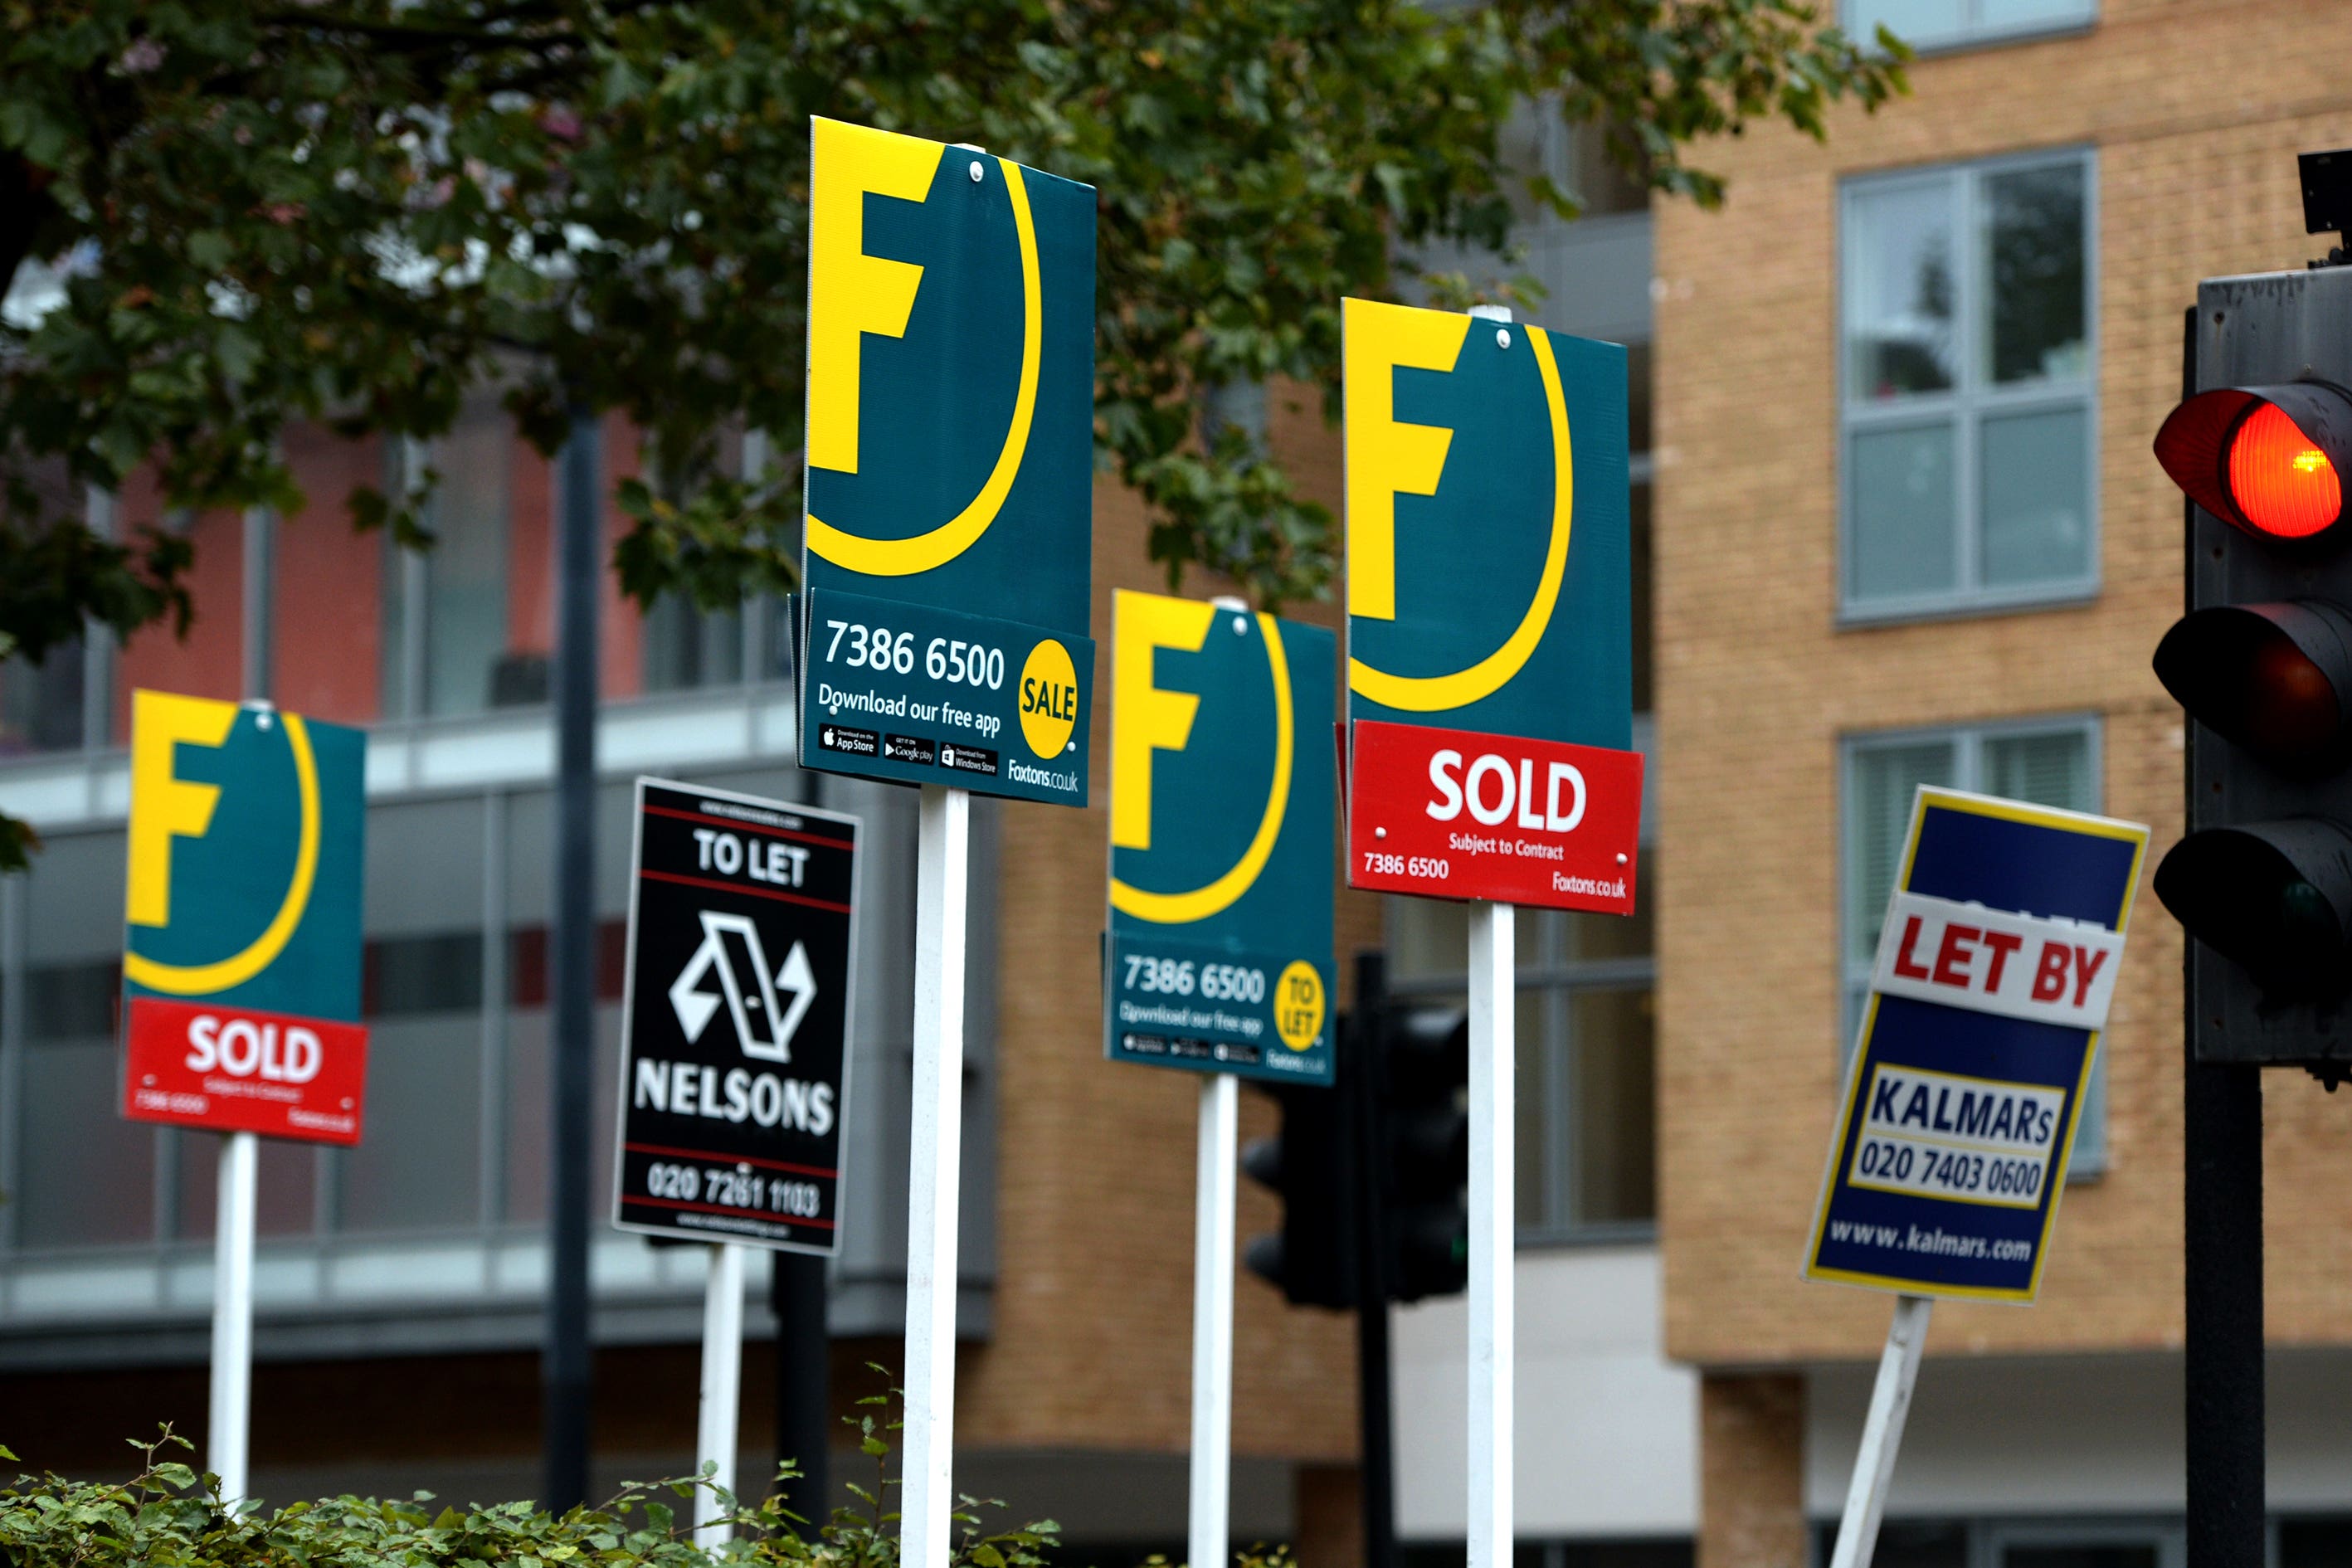 The average UK house price fell by 0.2 per cent month on month in March, although there are signs that activity is picking up, Nationwide Building Society said